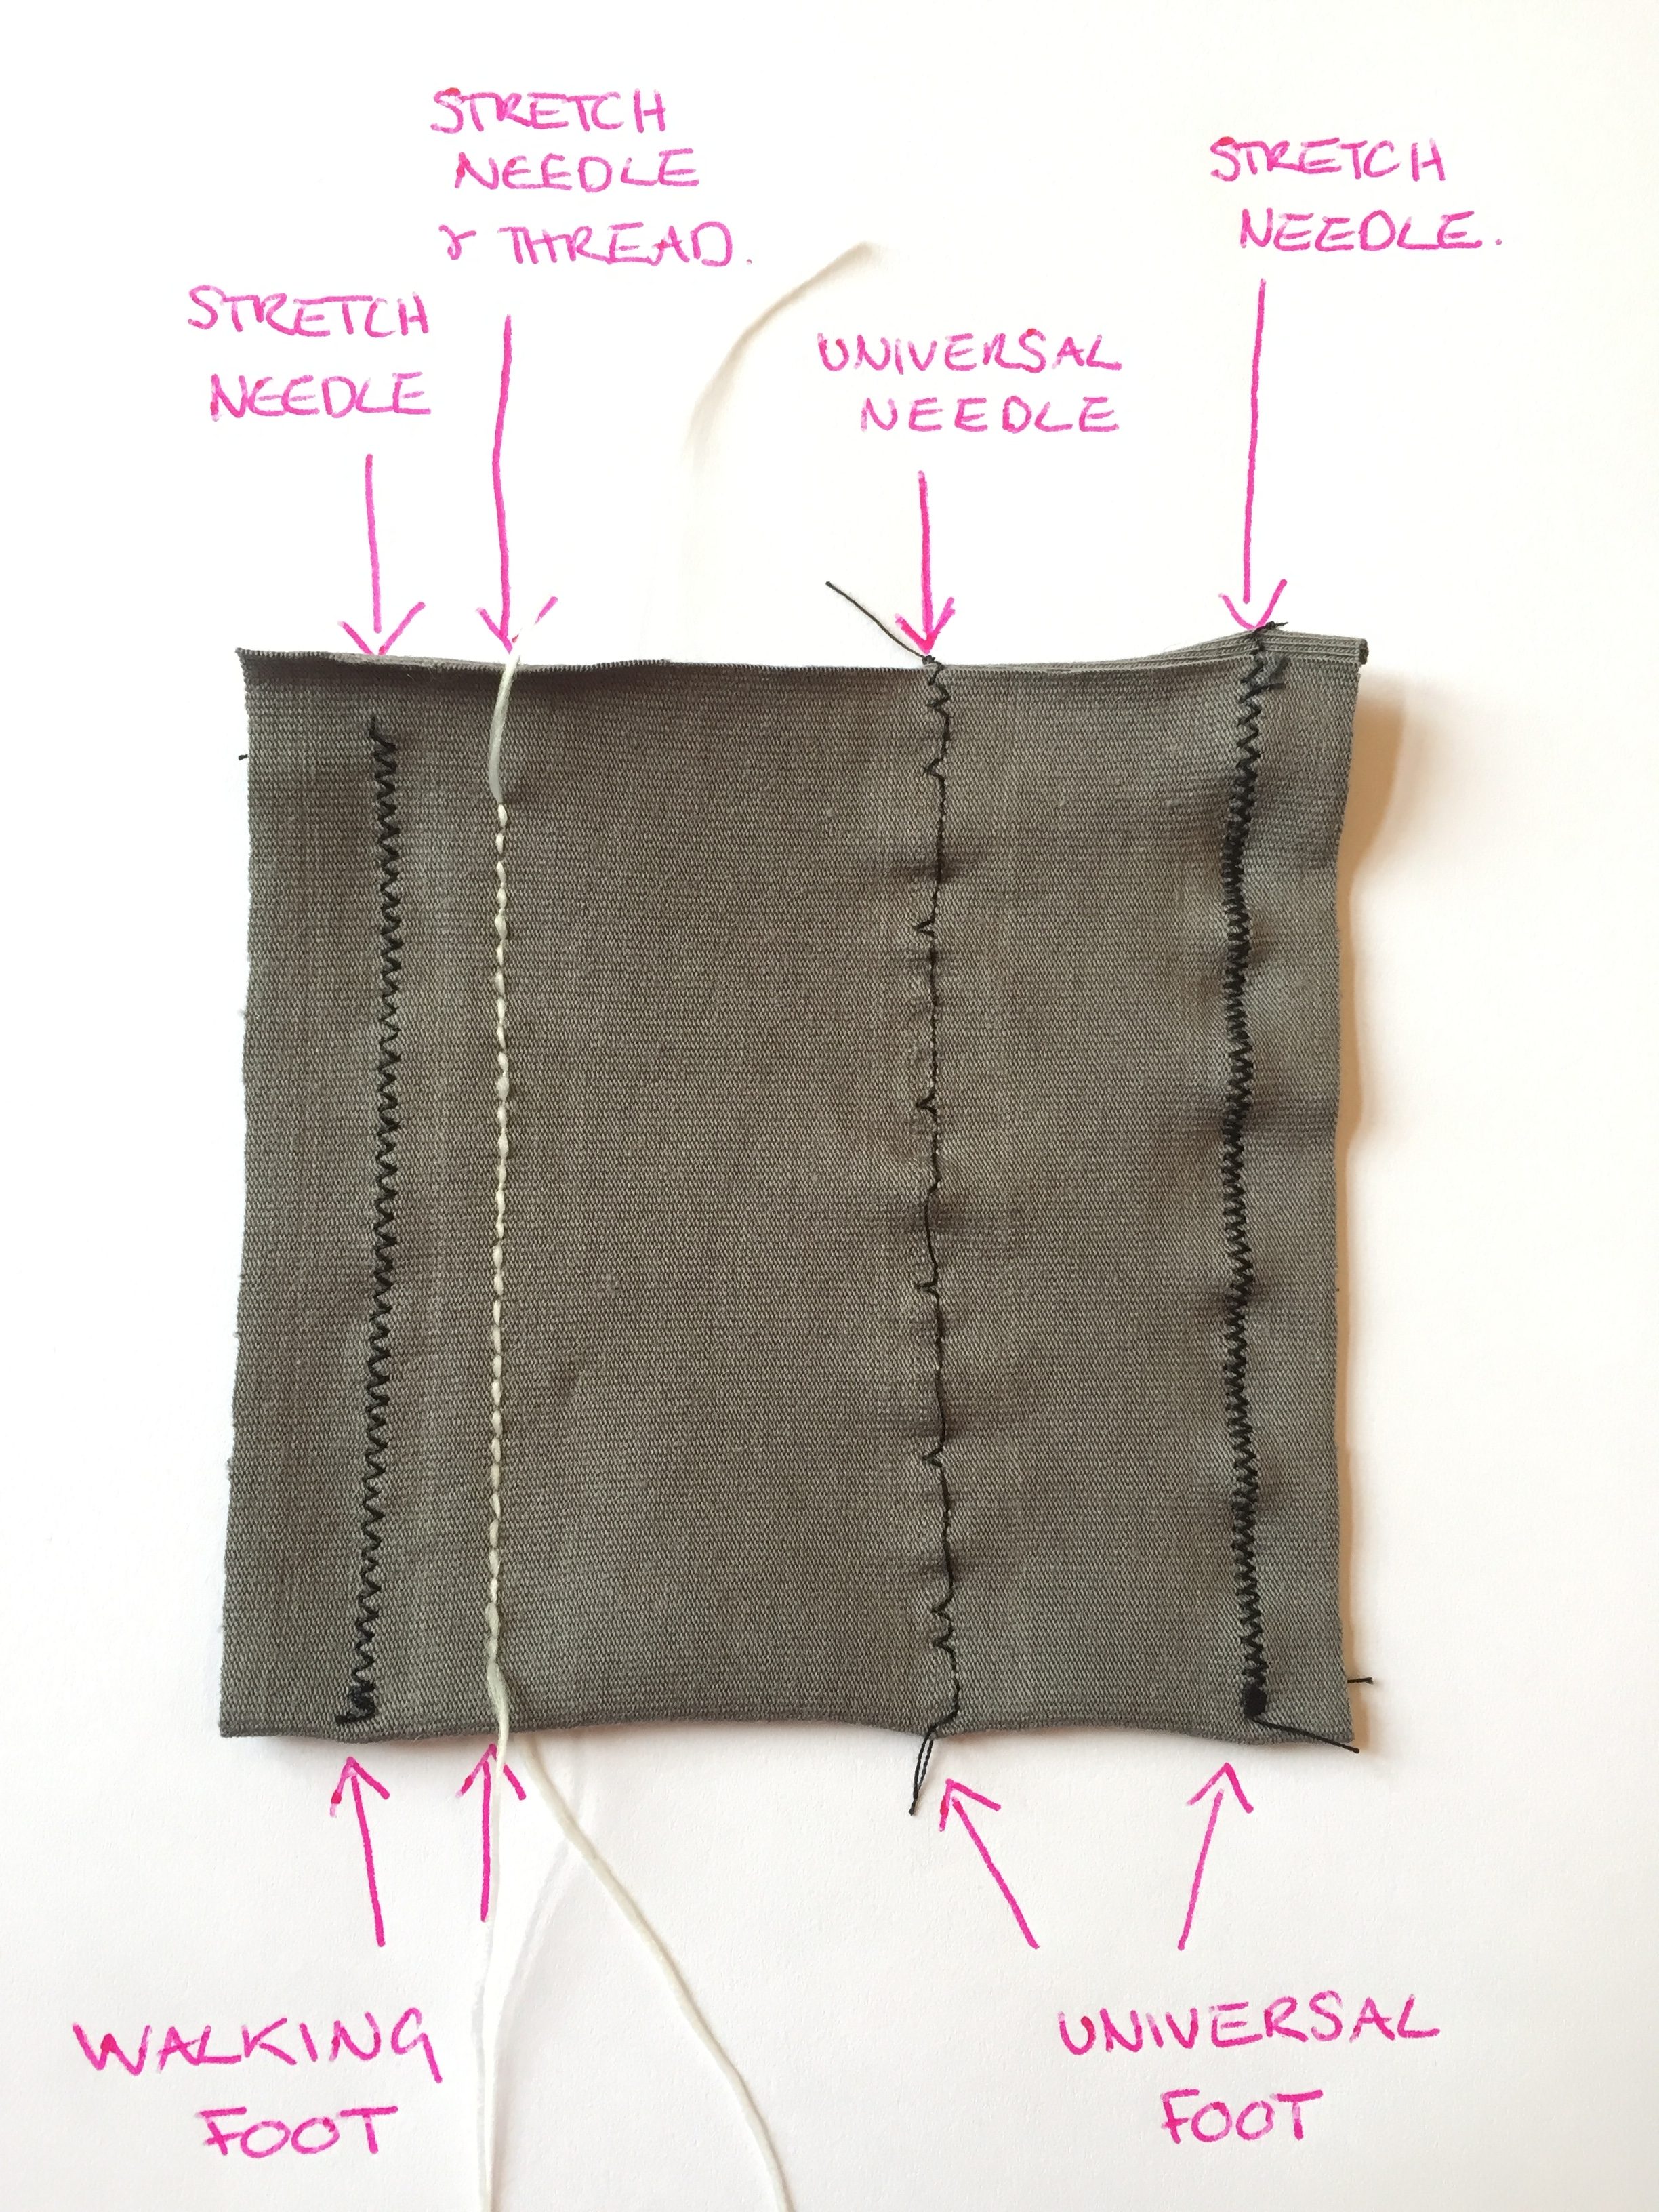 How to Sew Stretch Fabric - Made Easy for Beginners